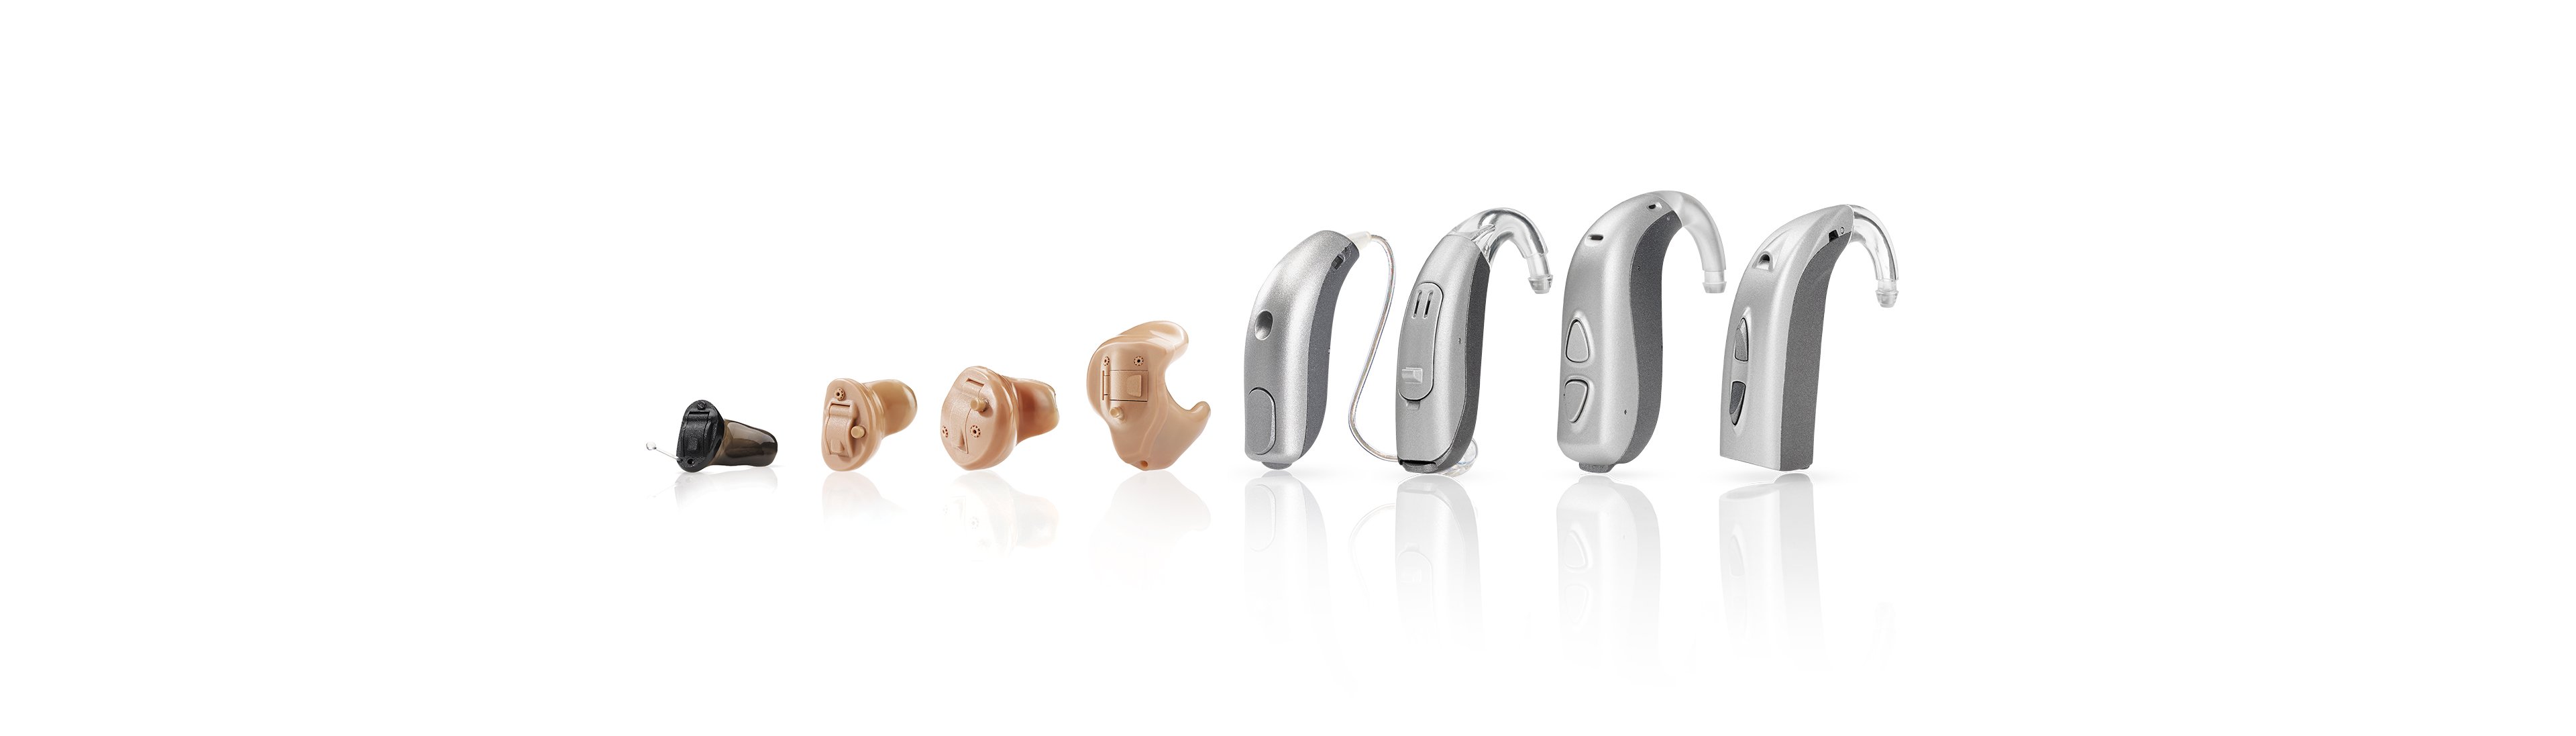 Cheer Hearing Aids Line-up